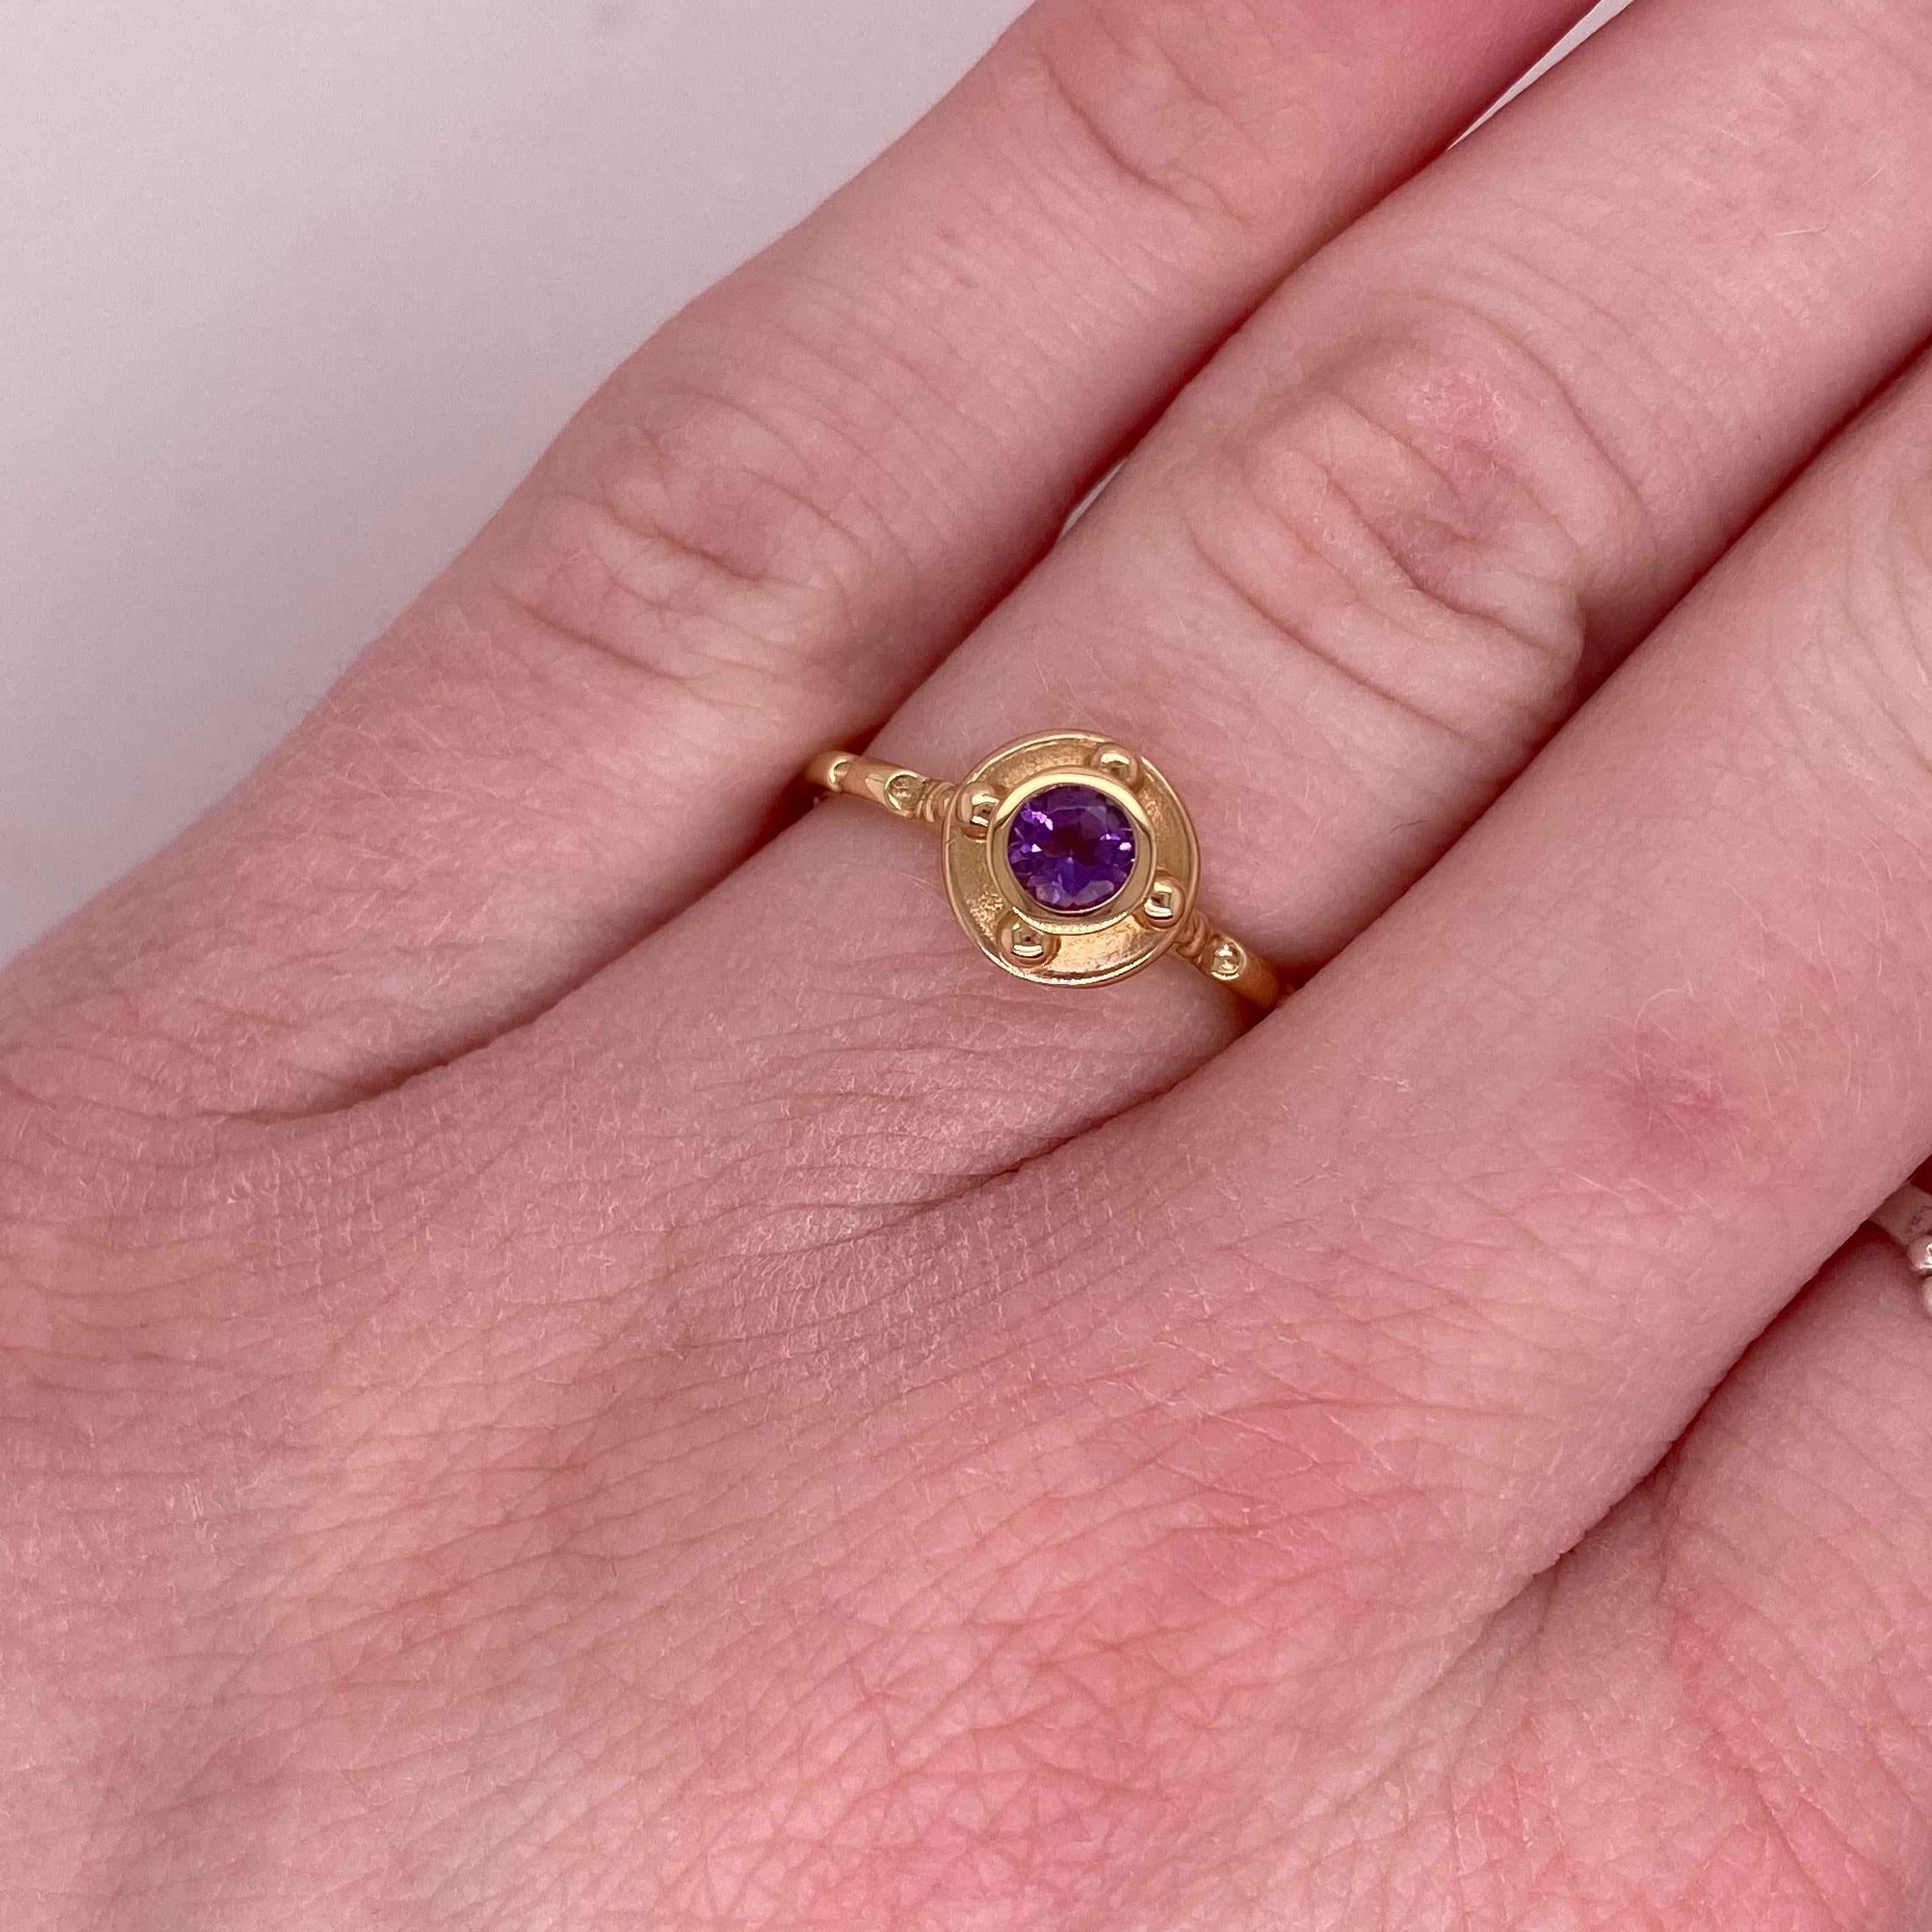 For Sale:  Amethyst Solitaire Ring, Yellow Gold, Round, Purple, Stackable, Bezel, February 2